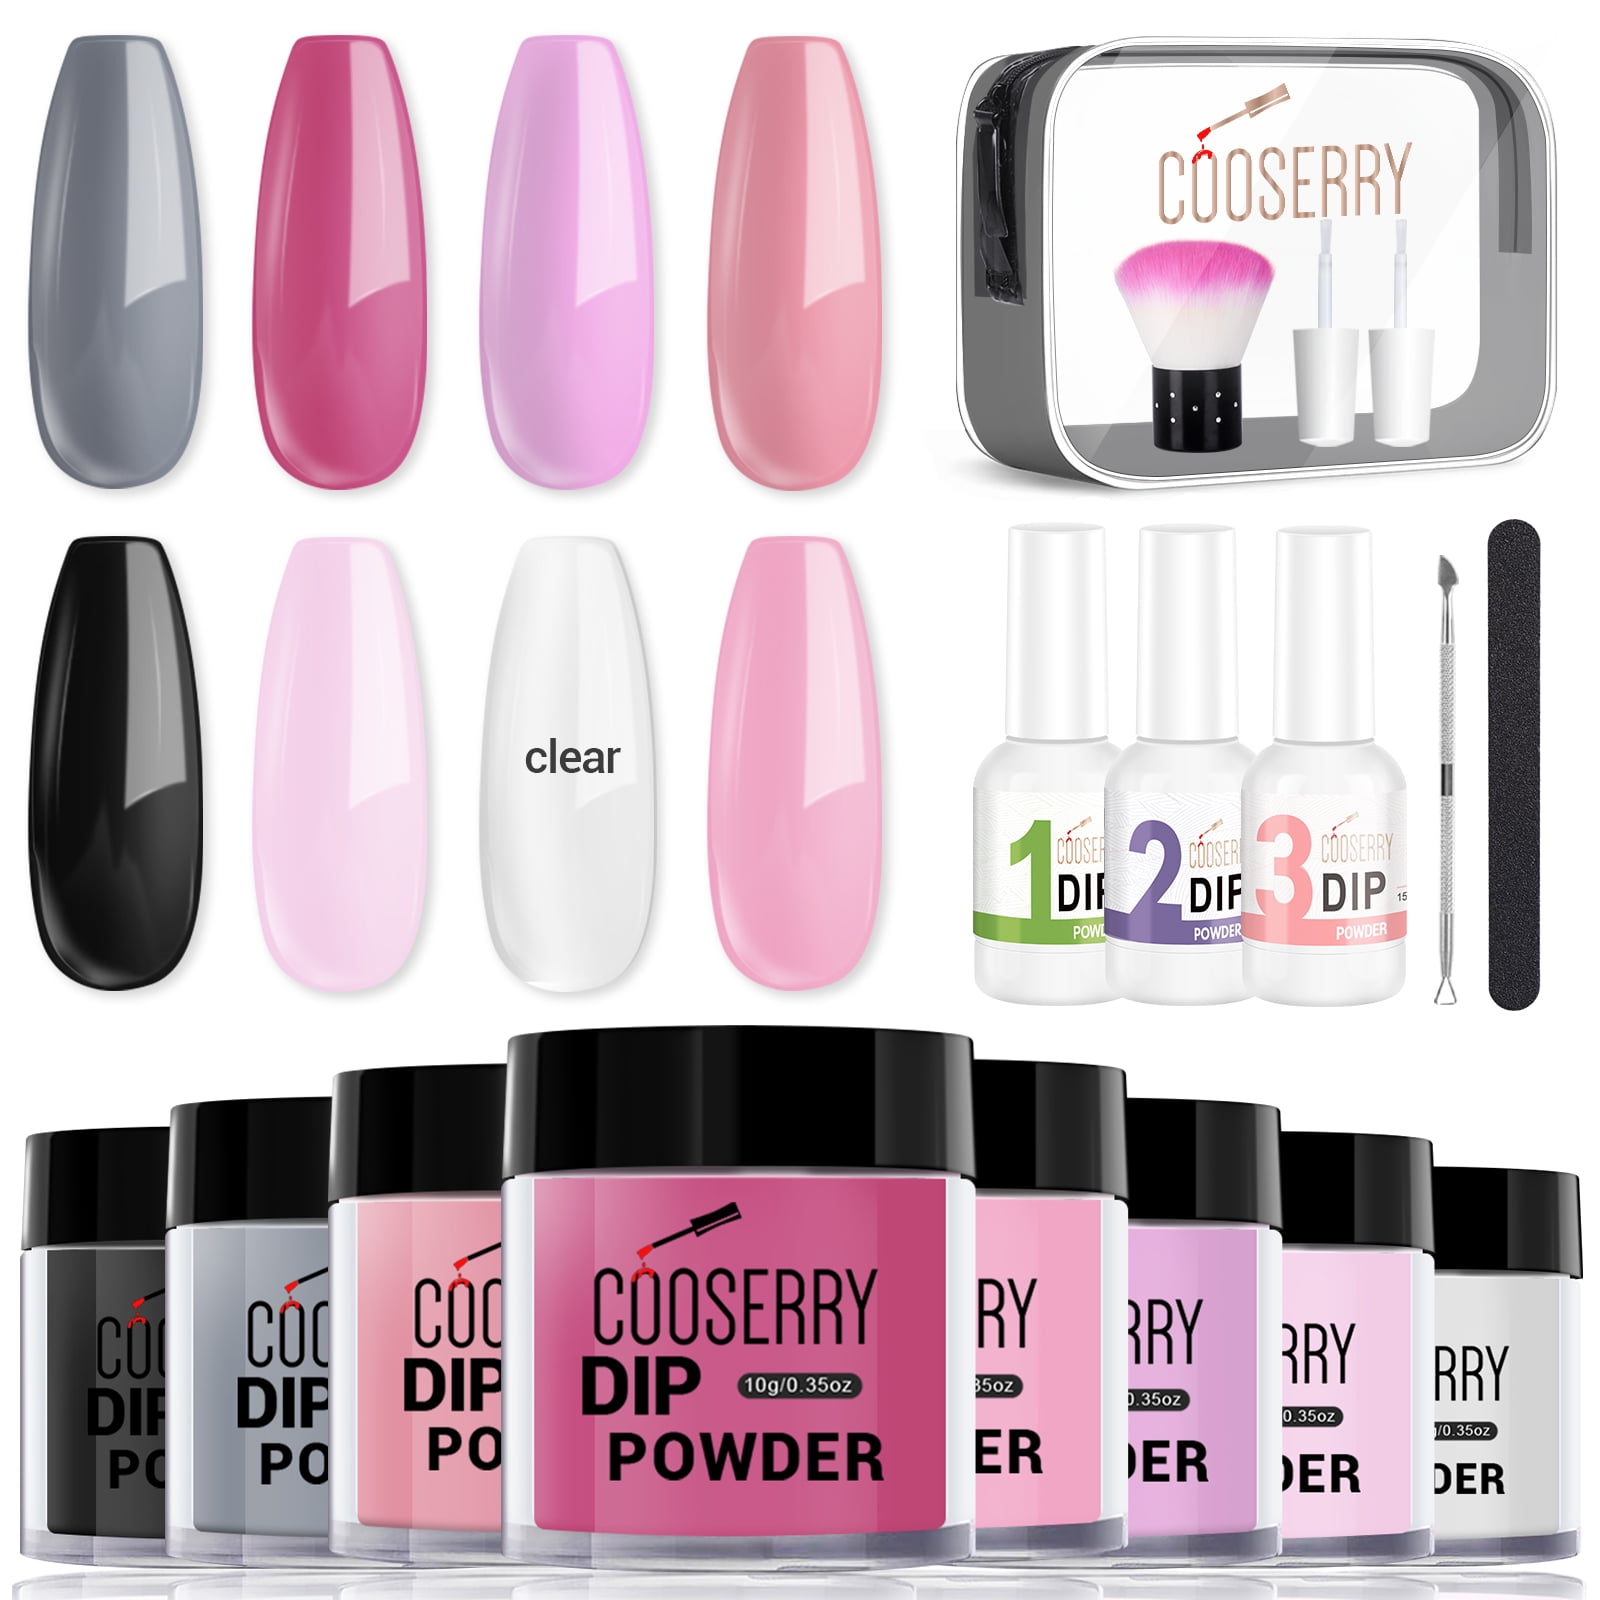 Dip Powder Nails The Original Dipping Powder SNS Nails Australia |  Multicolor Dipping Powder Starter Kit With Brush Dip Powder Nail Kit For  Starter Essential Portable Kit For Travel Nail Manicure Accessories